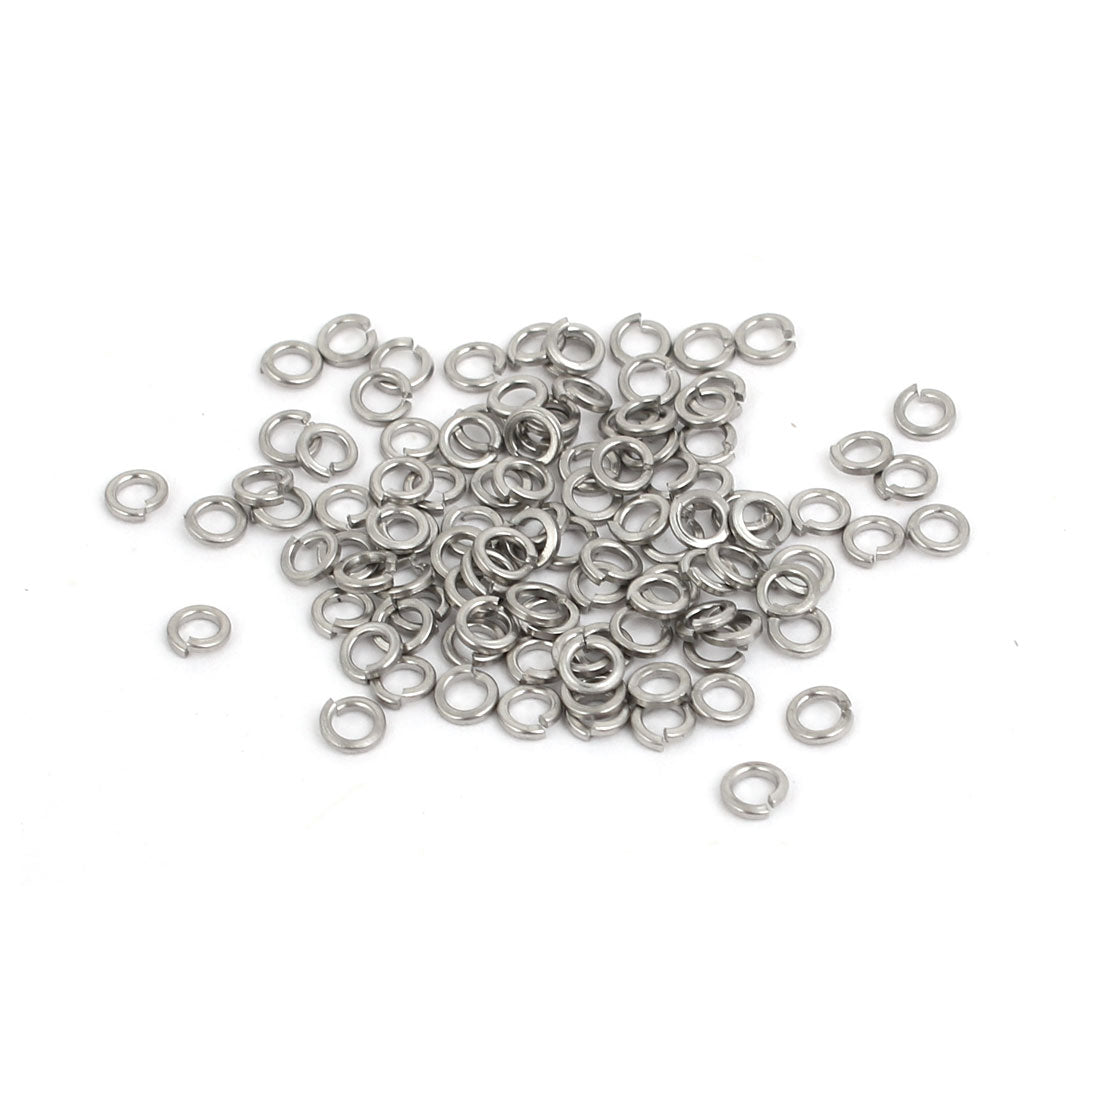 uxcell Uxcell 304 Stainless Steel M1.6 Split Lock Washer Gasket Ring Screw Pad 100pcs